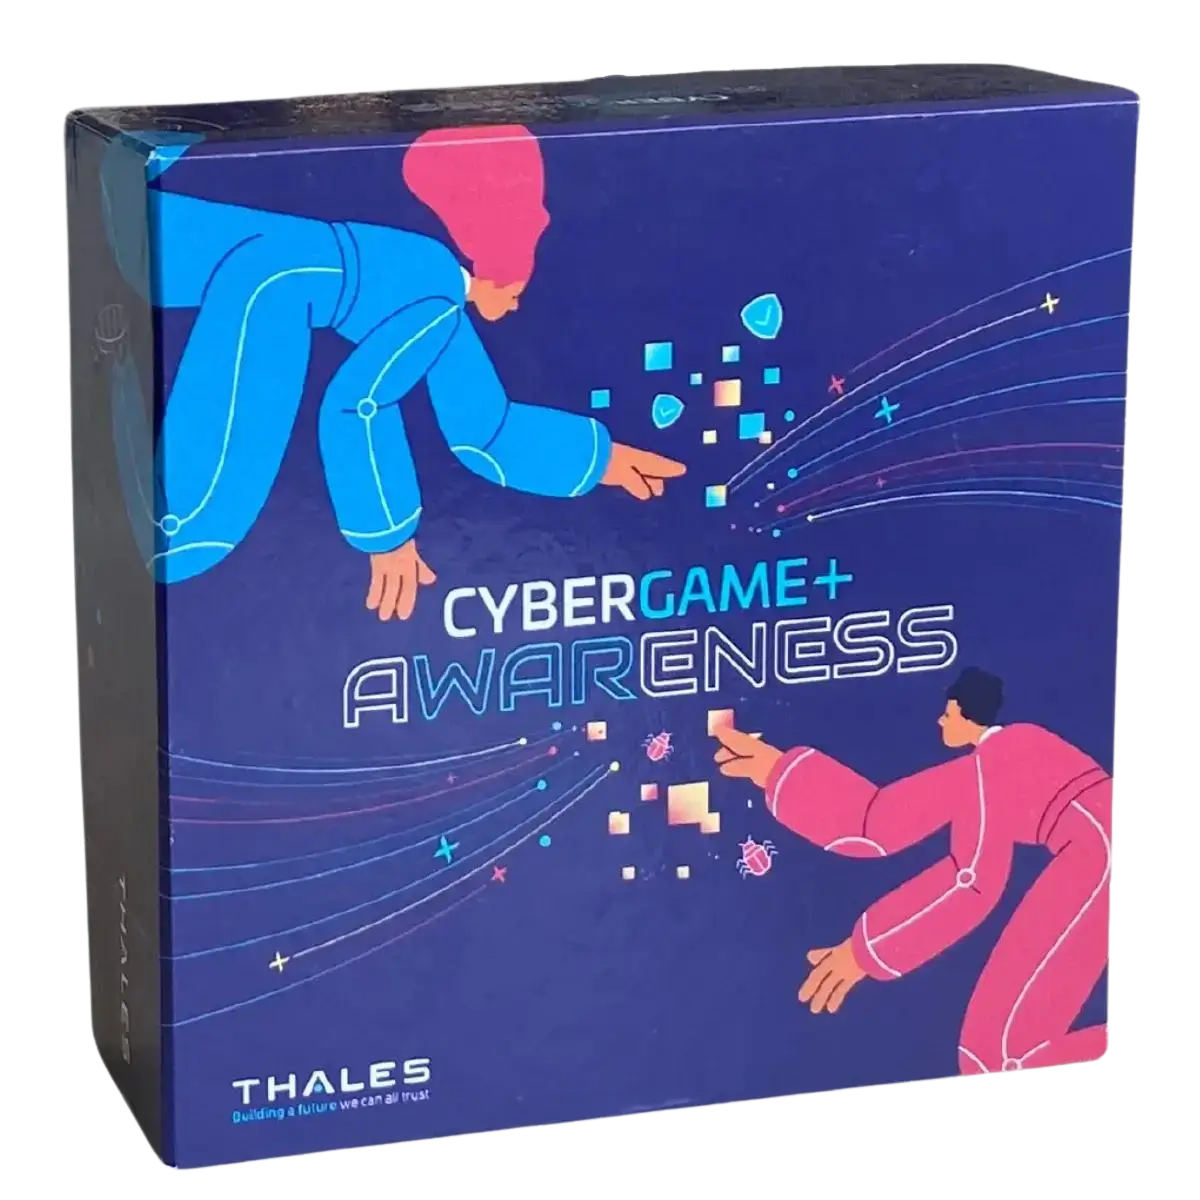 Cyber Wargame customized in its entirety for Thales, the new game is called CyberGame aWAReness